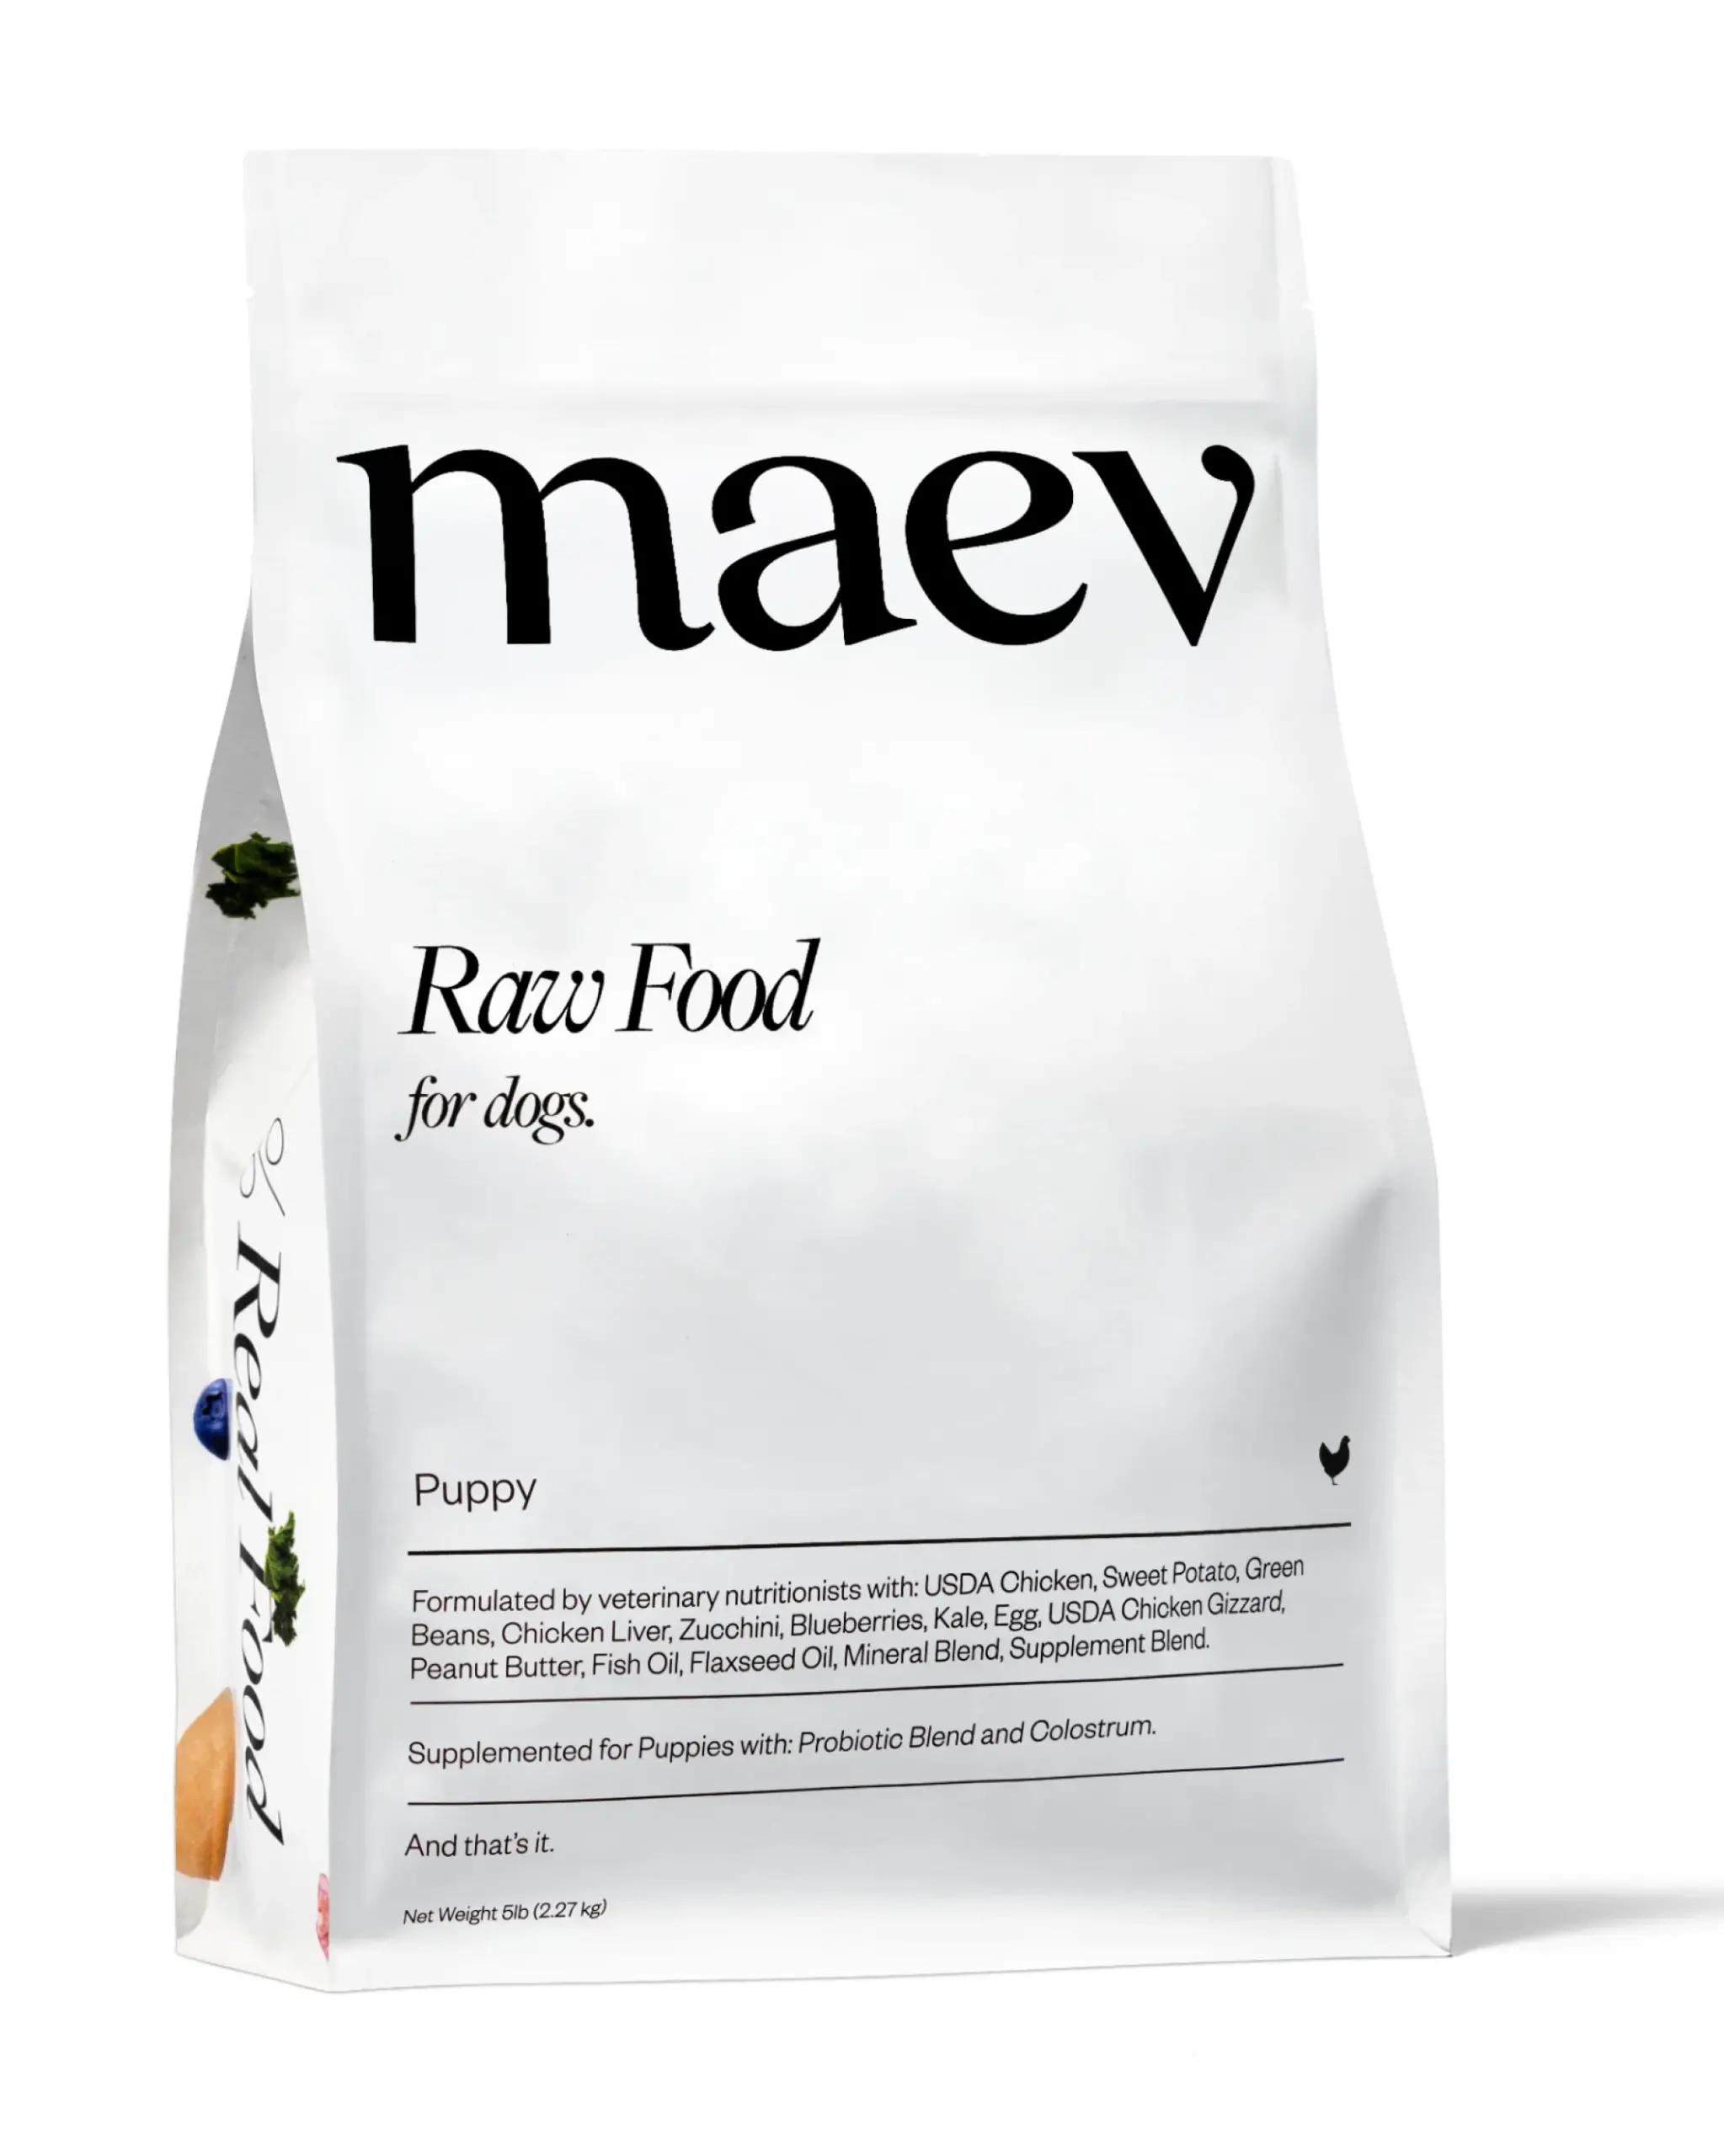 Maev Raw Dog Food Review